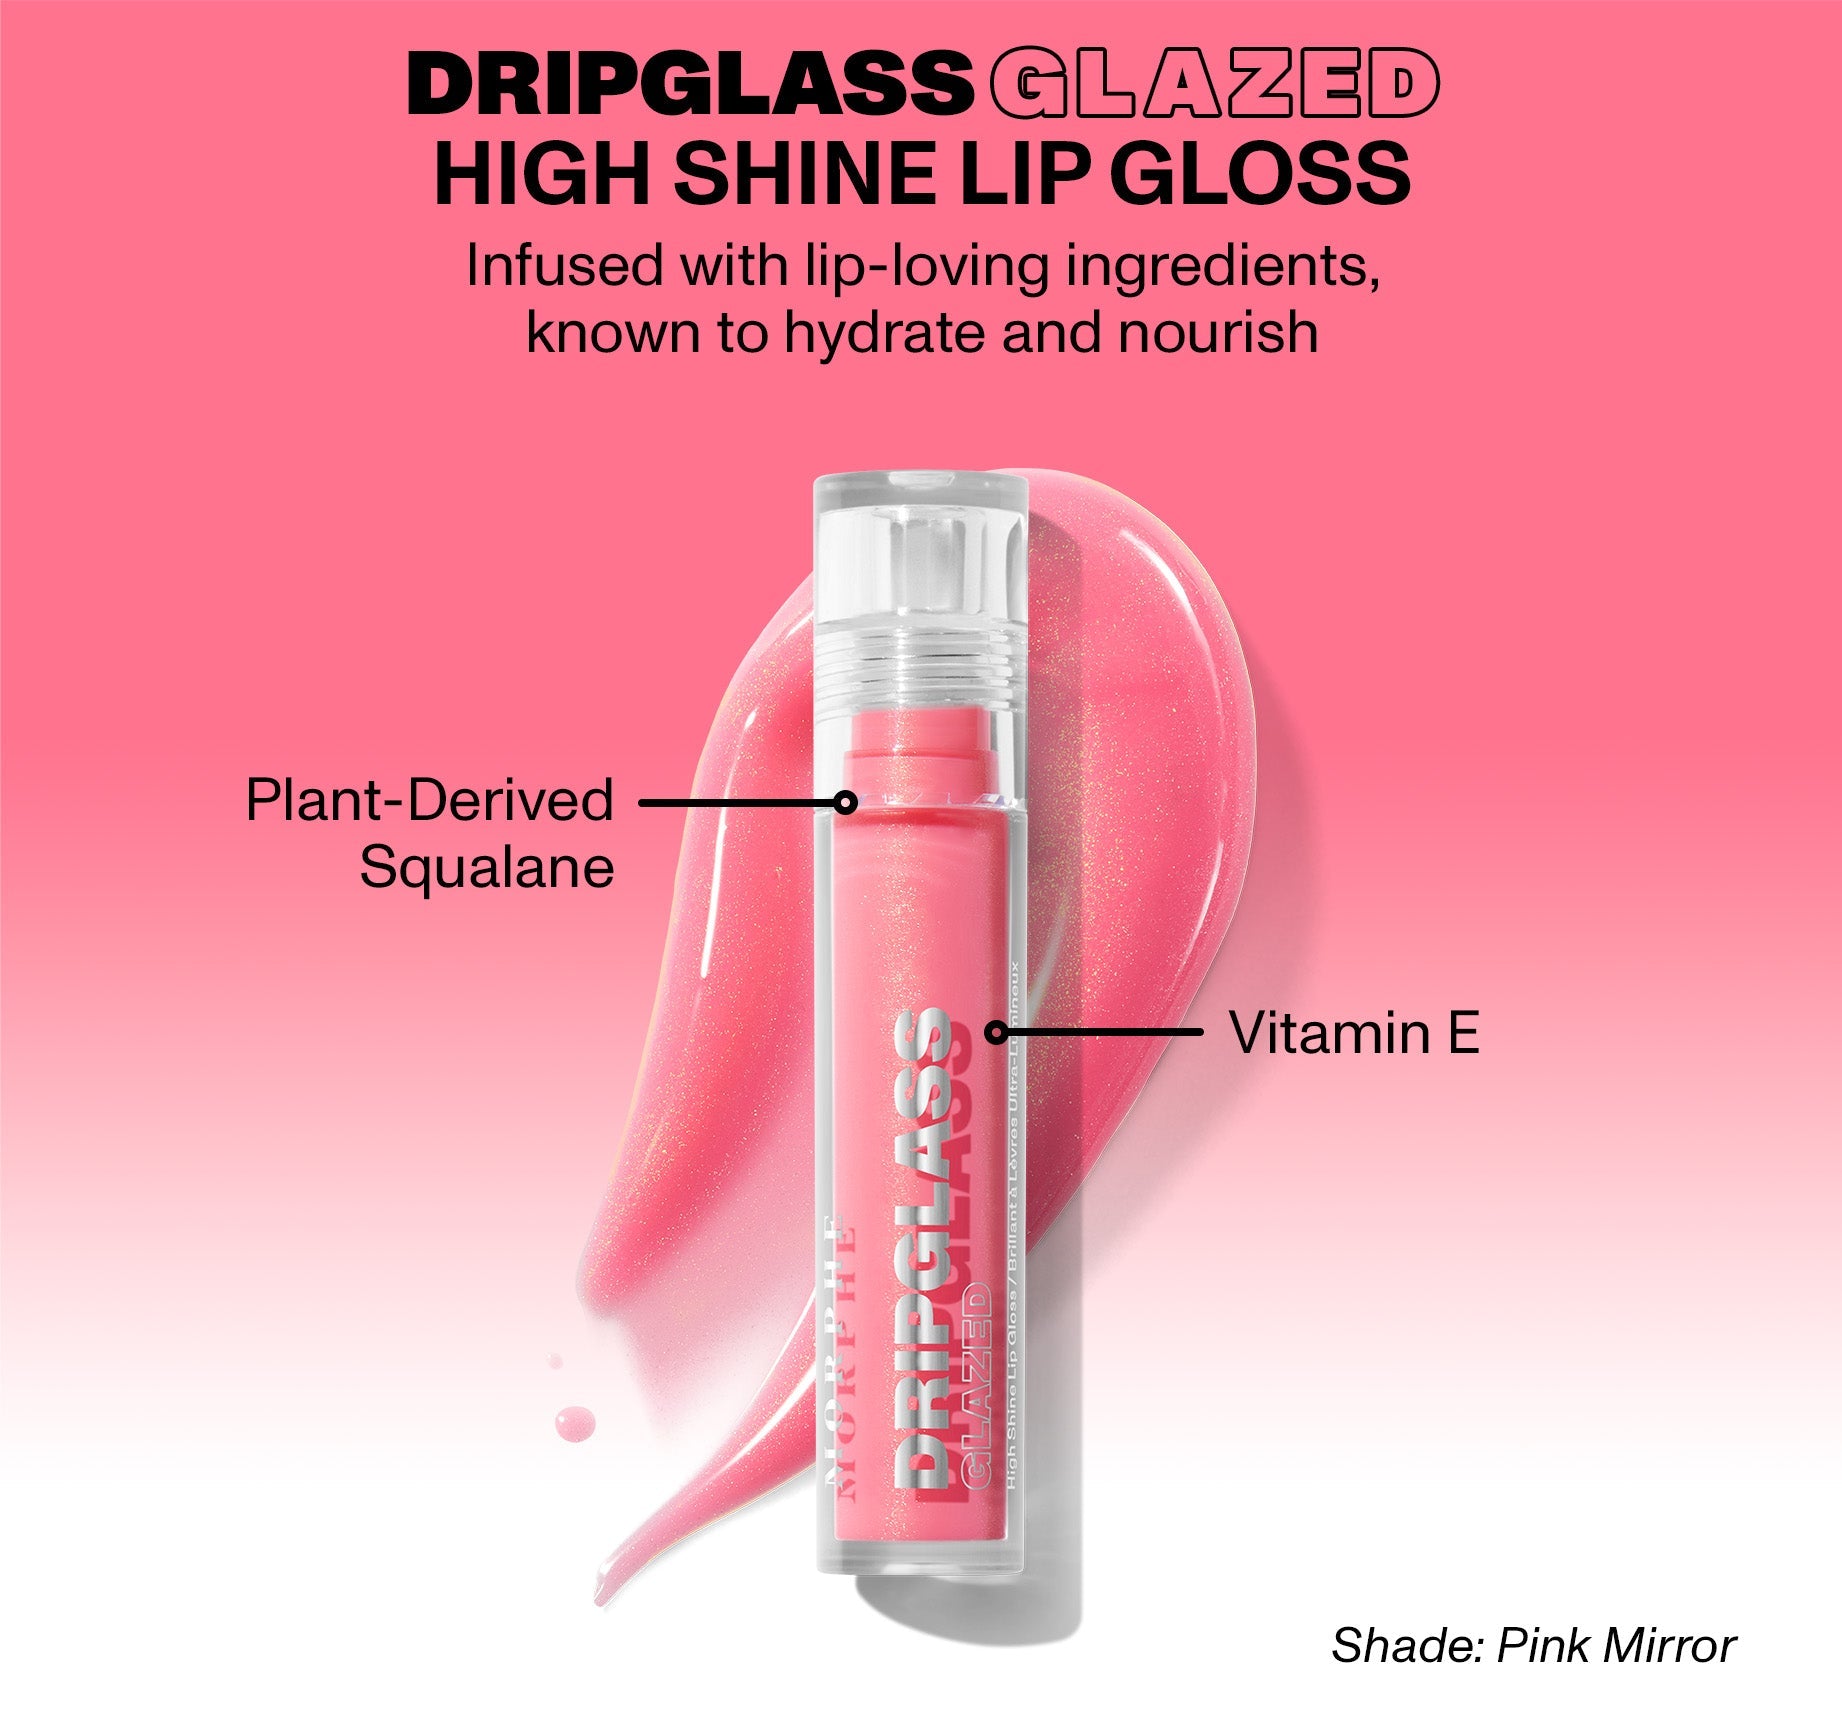 Dripglass Glazed High Shine Lip Gloss - Berry Stained - Image 6